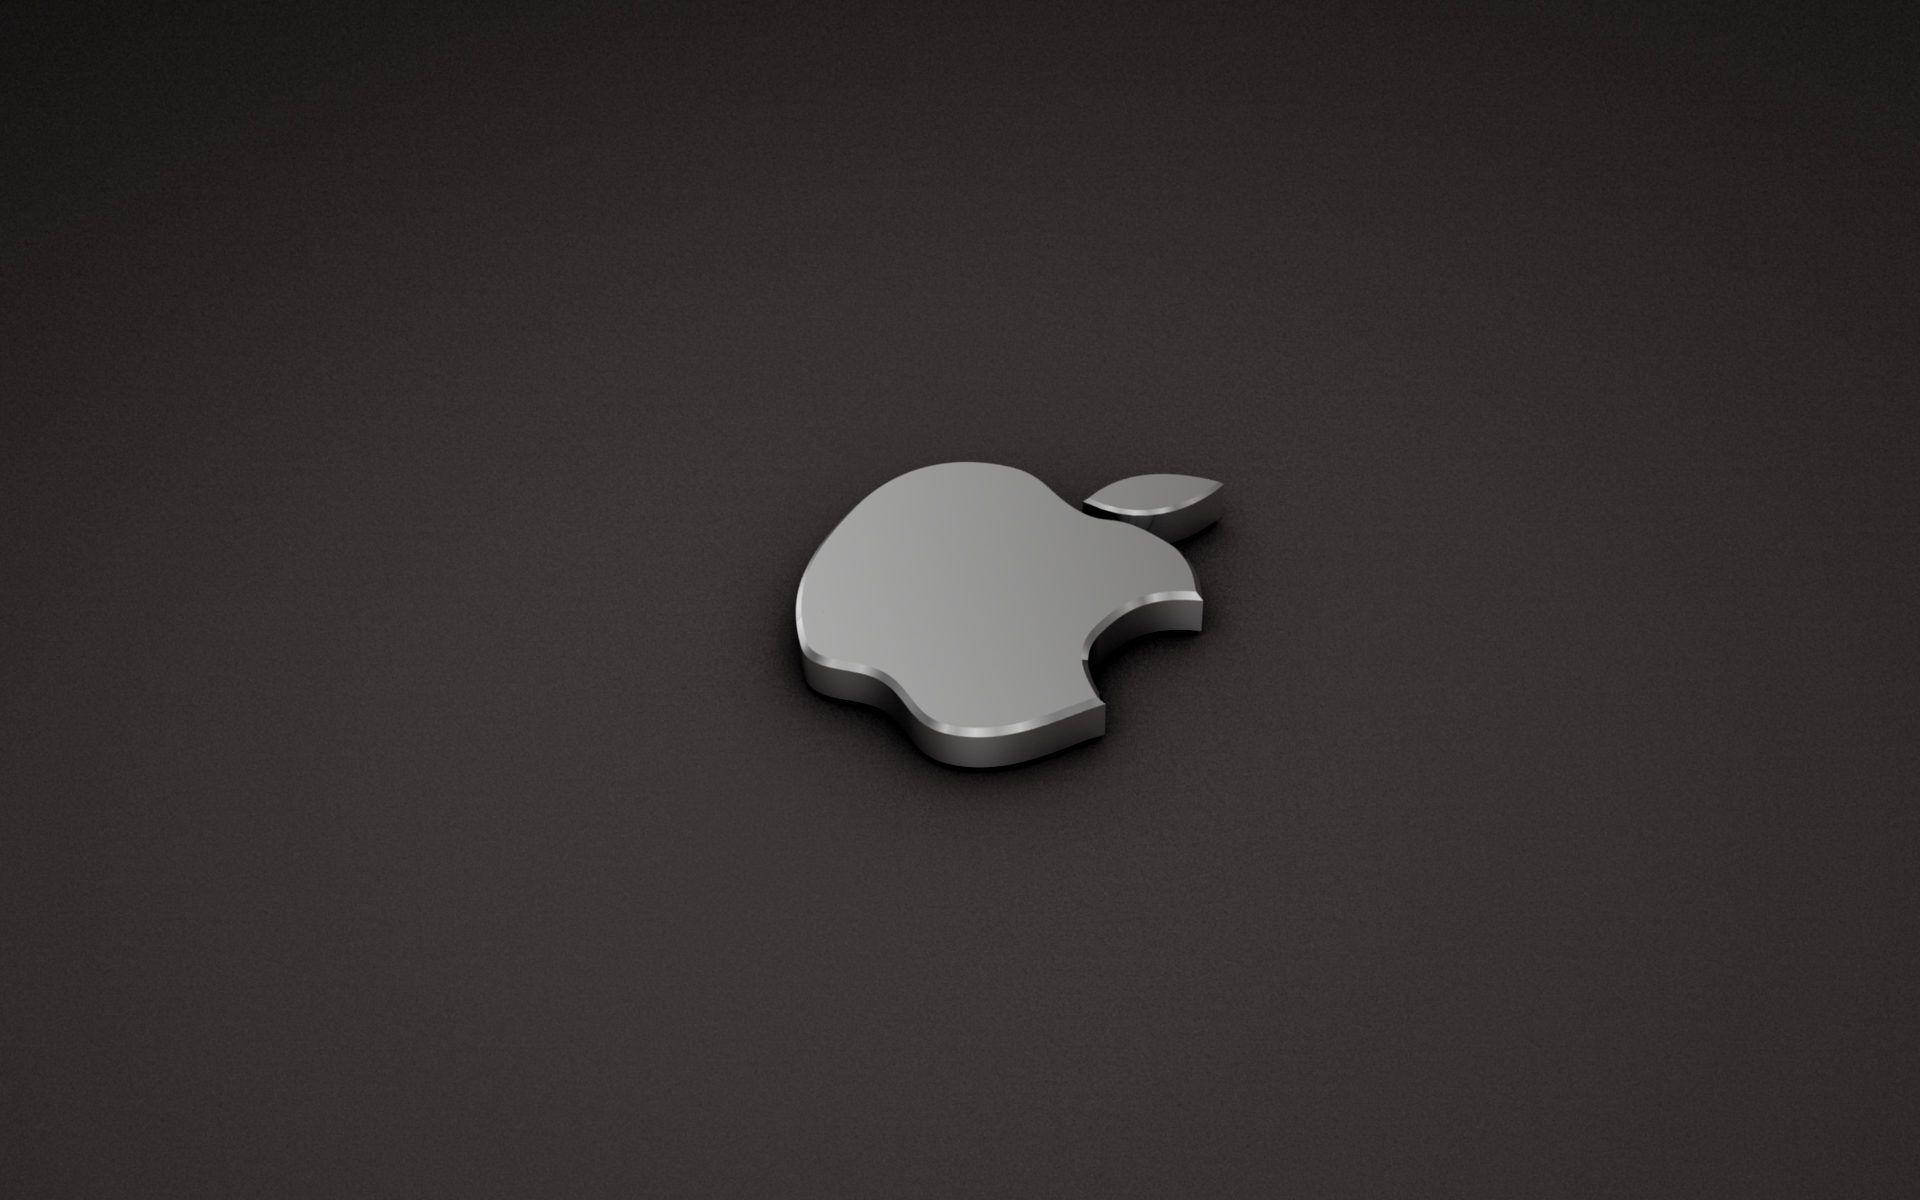 Silver 3d Apple Iphone Logo Lying Down Background